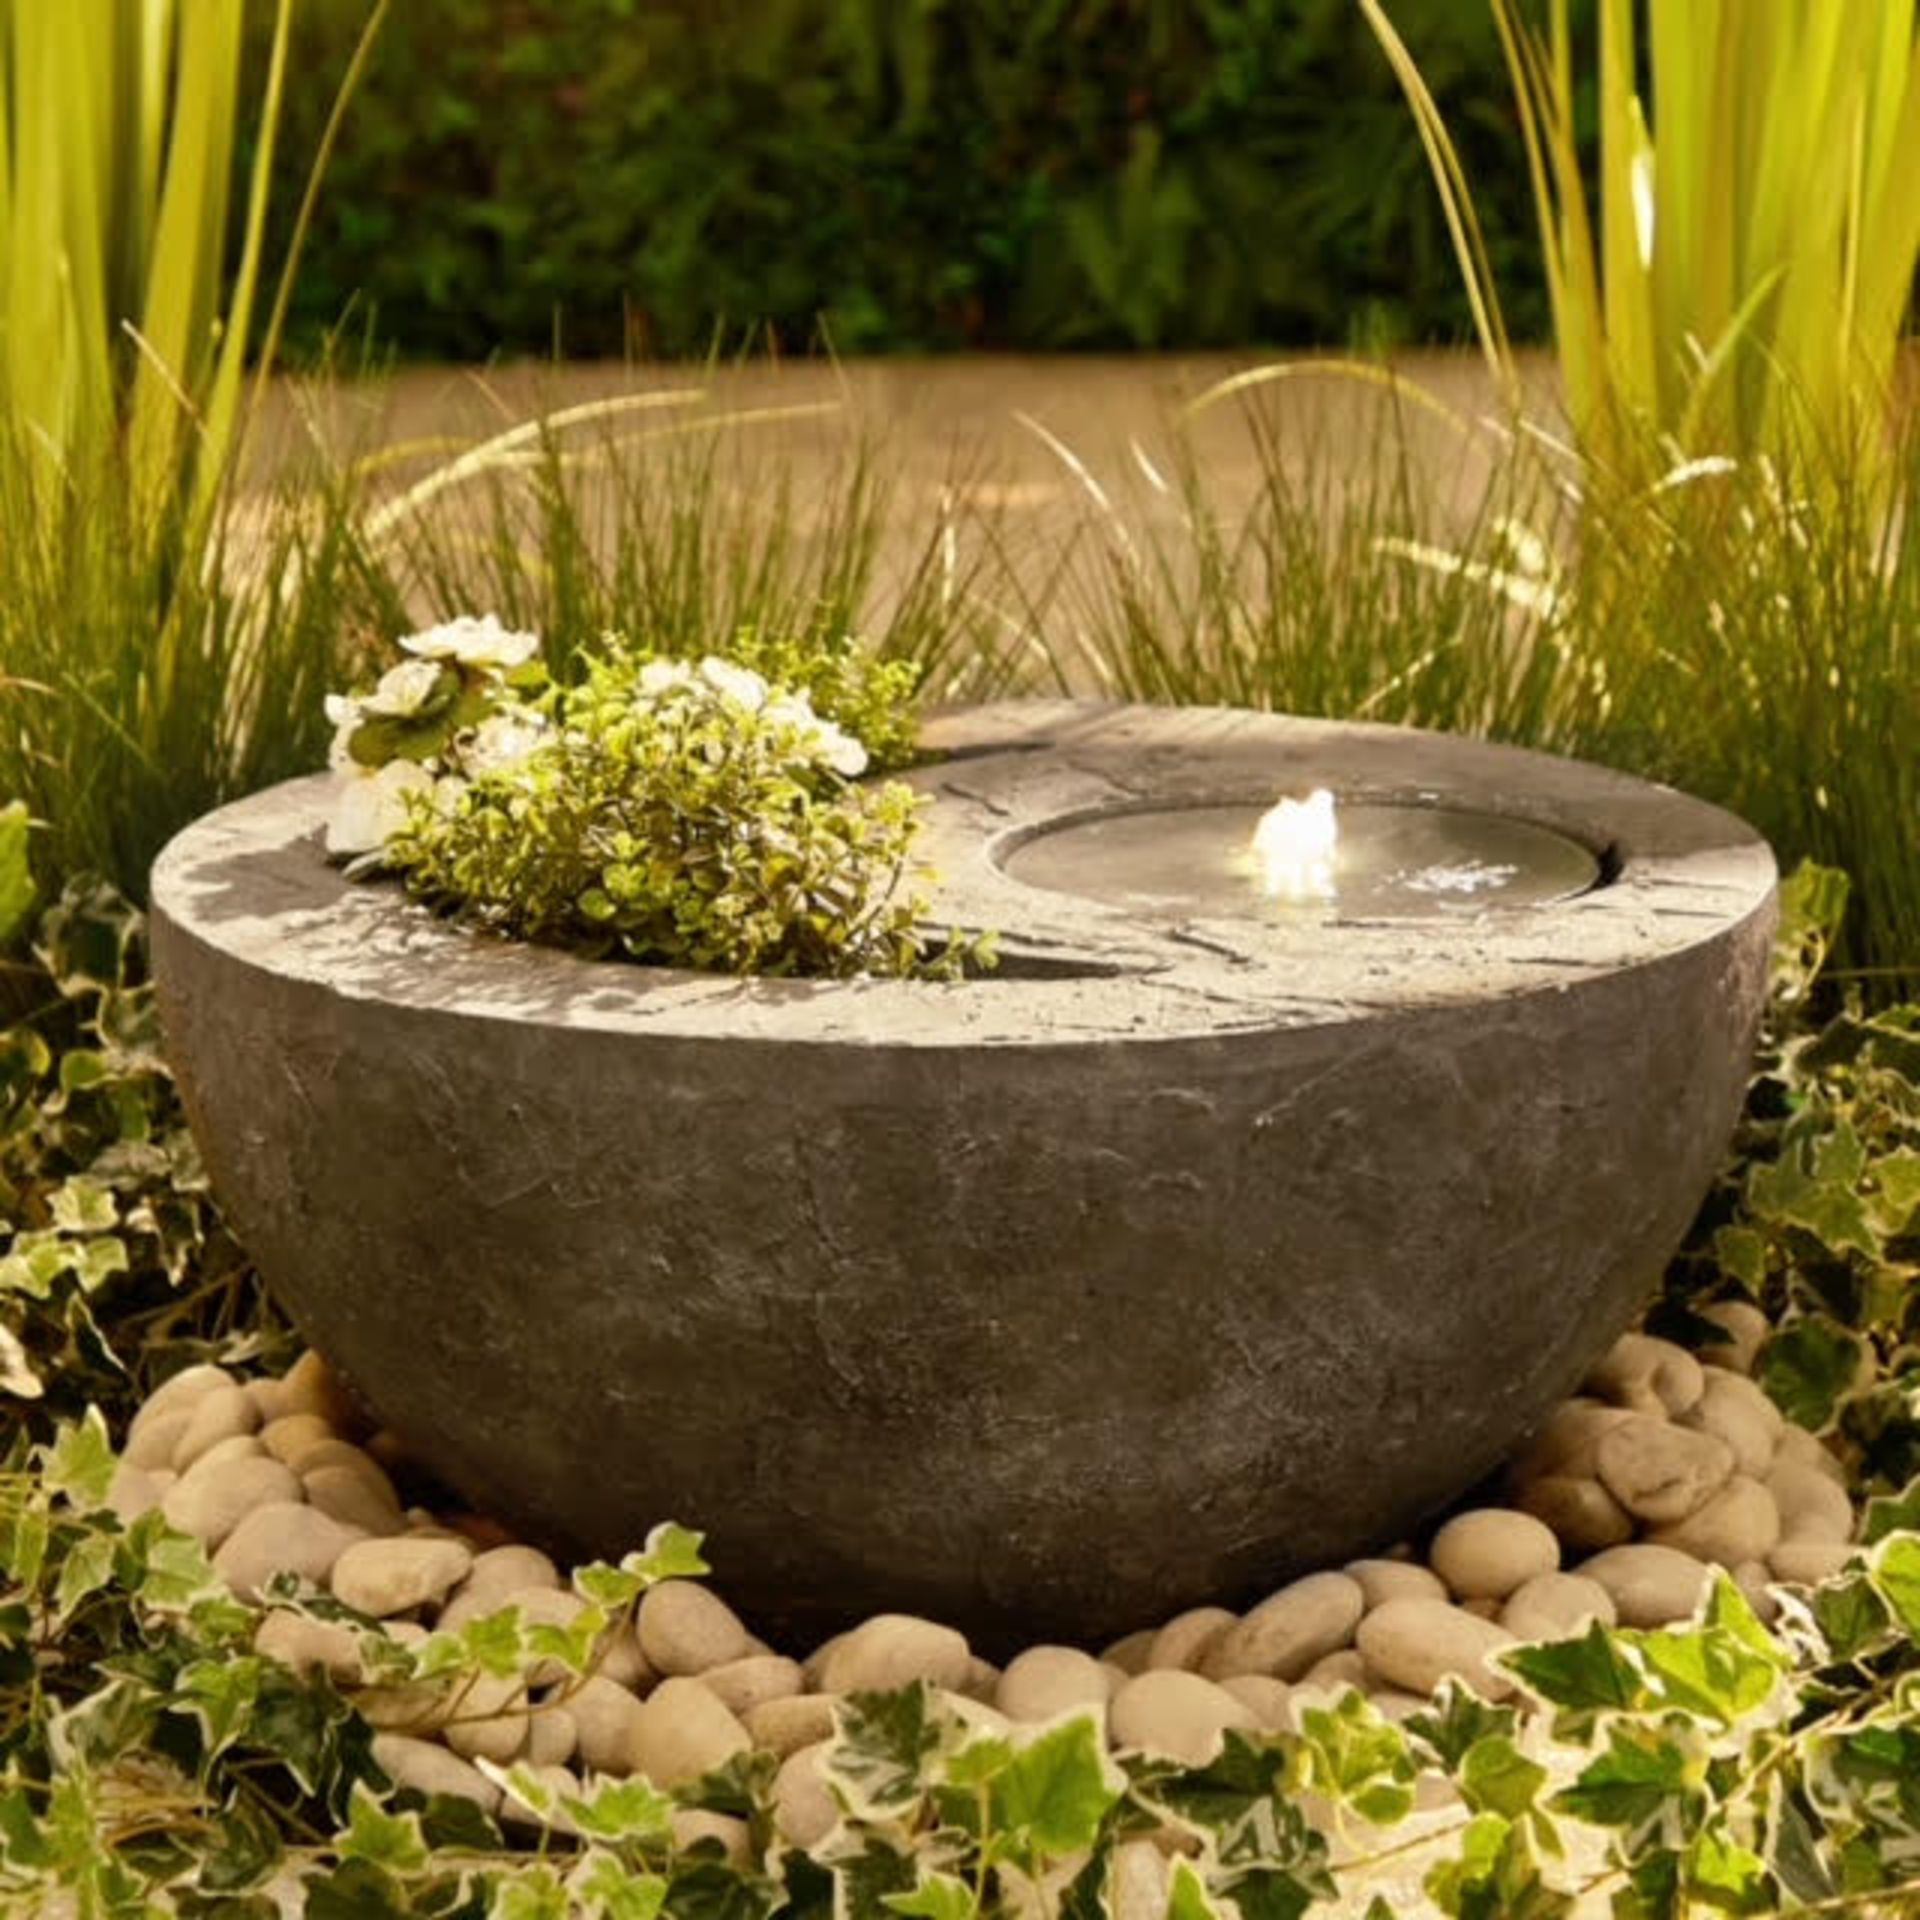 Trade Lot 5 x New & Boxed Dual Water Feature and Planter. RRP £299.99 (REF726) - Garden Bowl - Image 7 of 8